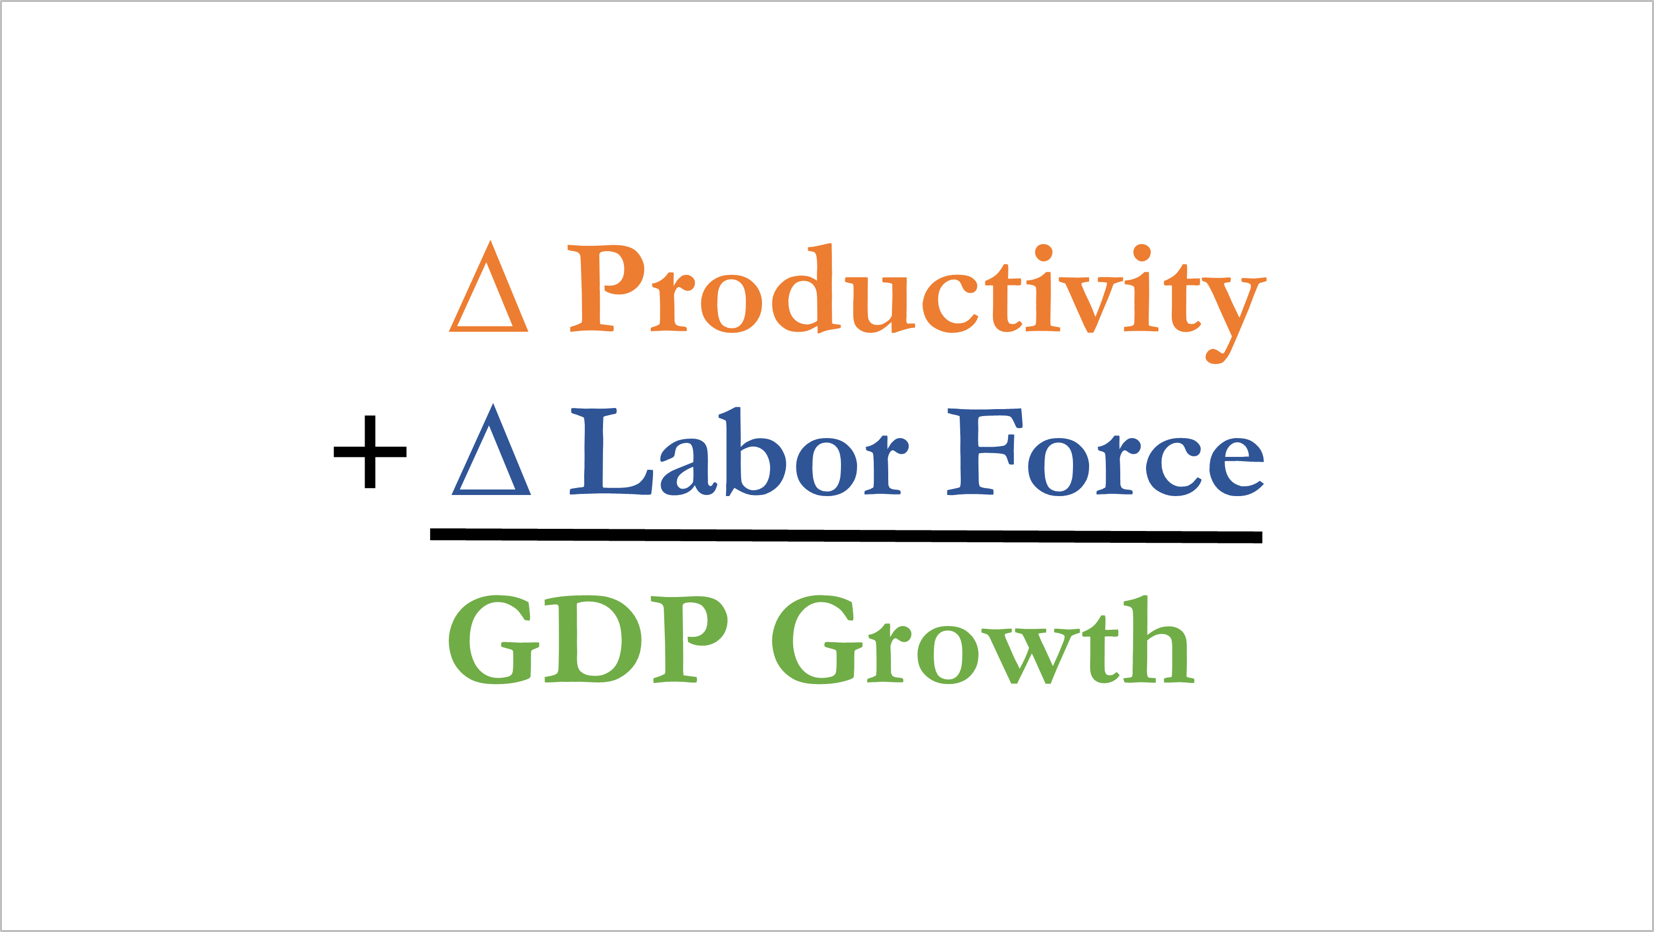 gdp growth rate formula